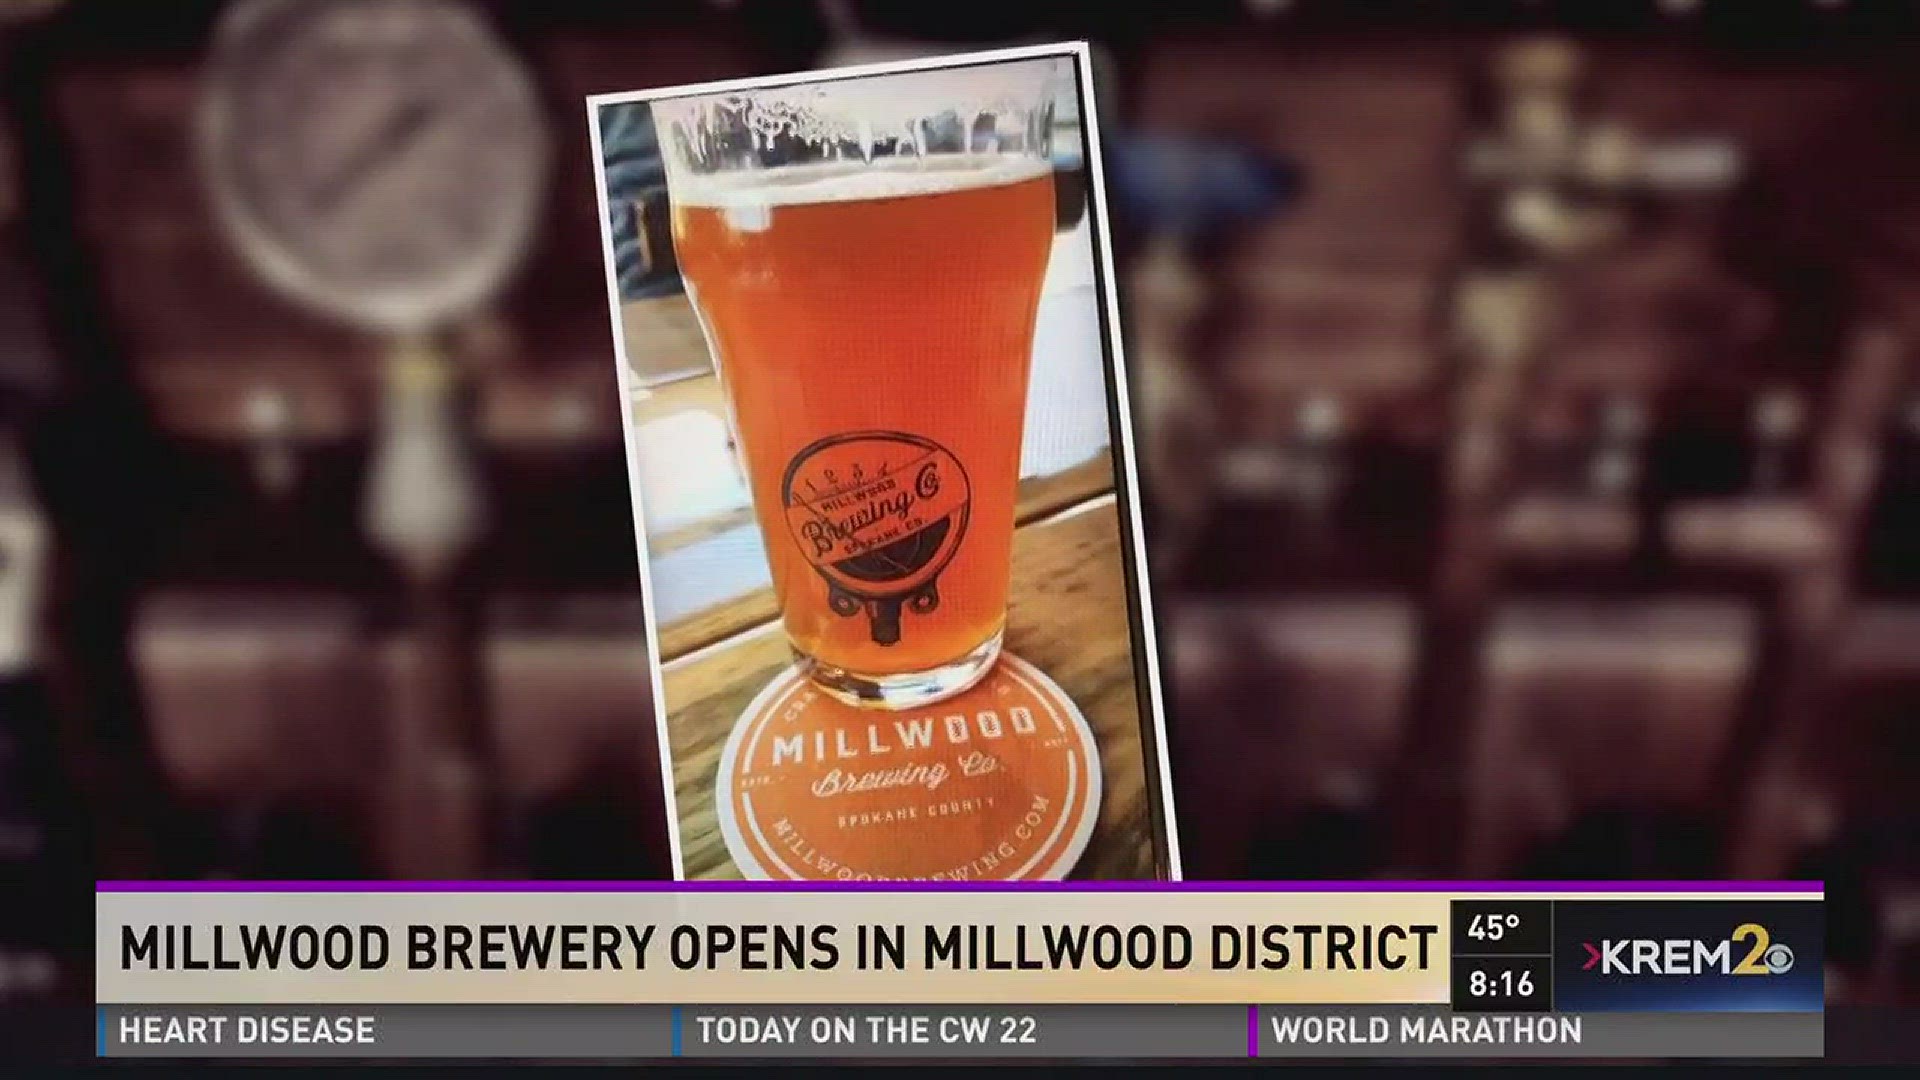 Millwood Brewery serves up tasty pints in Millwood District